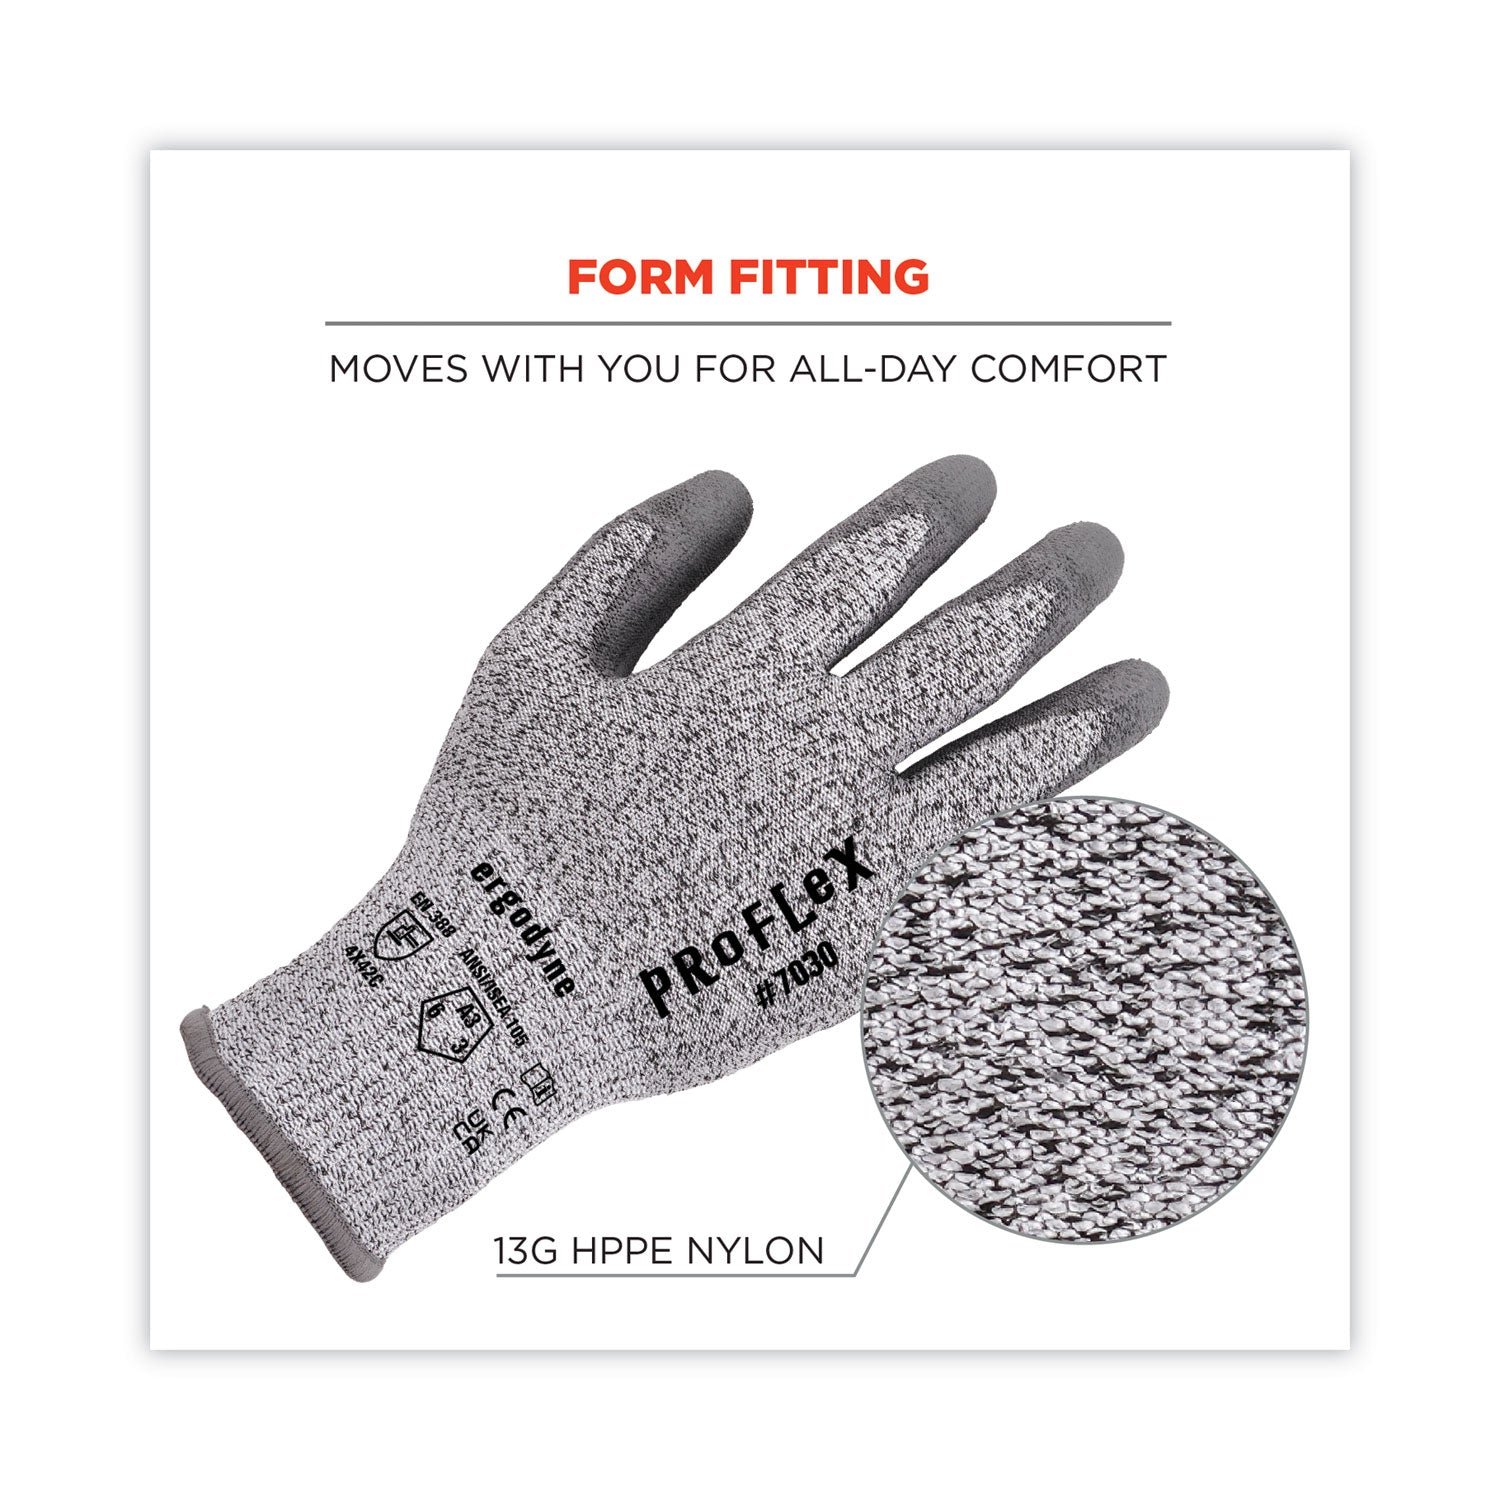 proflex-7030-ansi-a3-pu-coated-cr-gloves-gray-large-pair-ships-in-1-3-business-days_ego10464 - 5